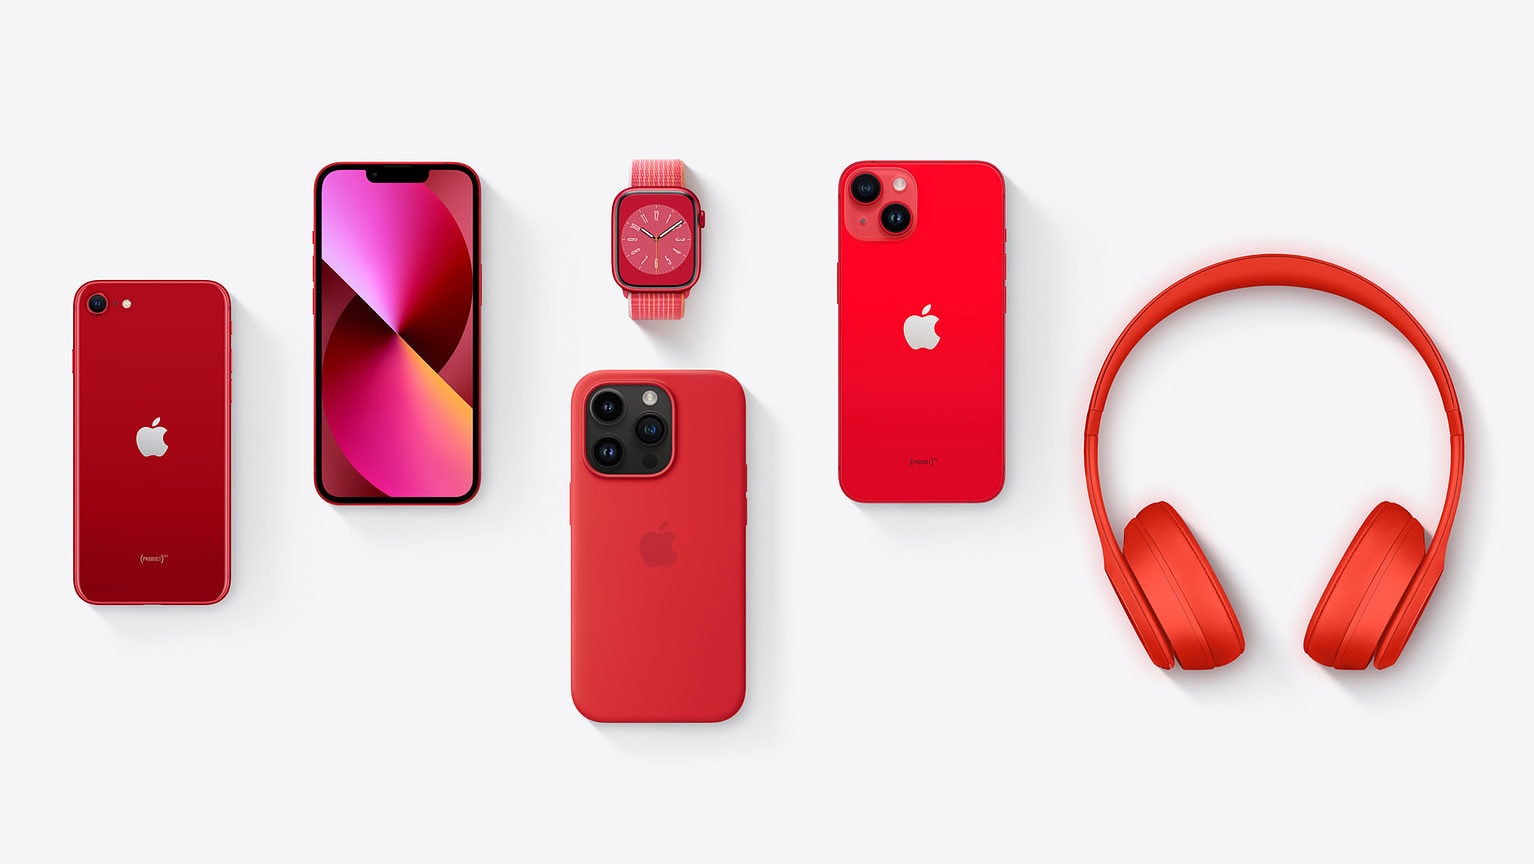 Here's a range of (Product) Red devices that help support the fight against AIDS.